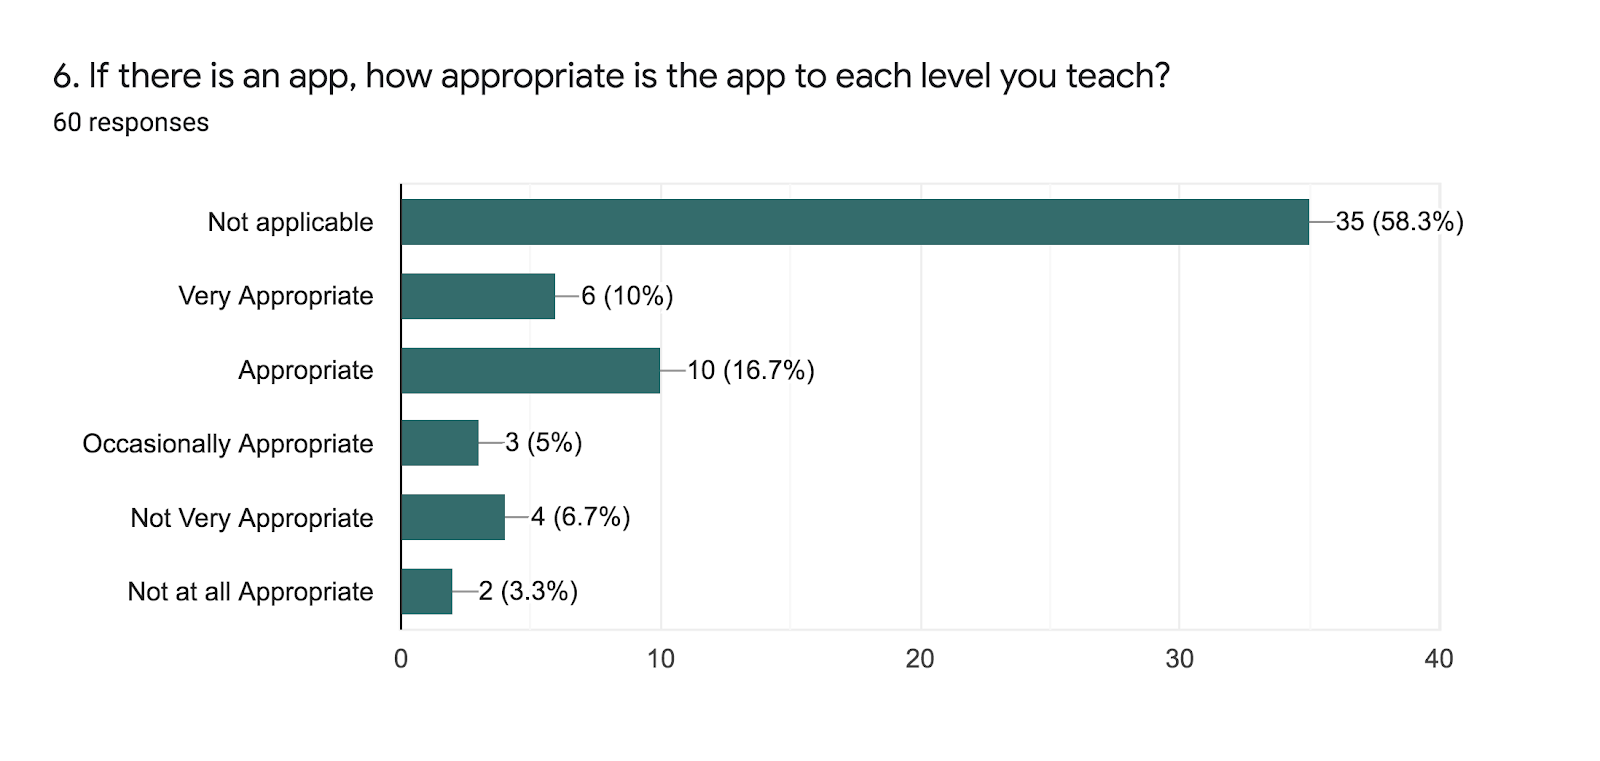 Forms response chart. Question title: 6. If there is an app, how appropriate is the app to each level you teach?. Number of responses: 60 responses.